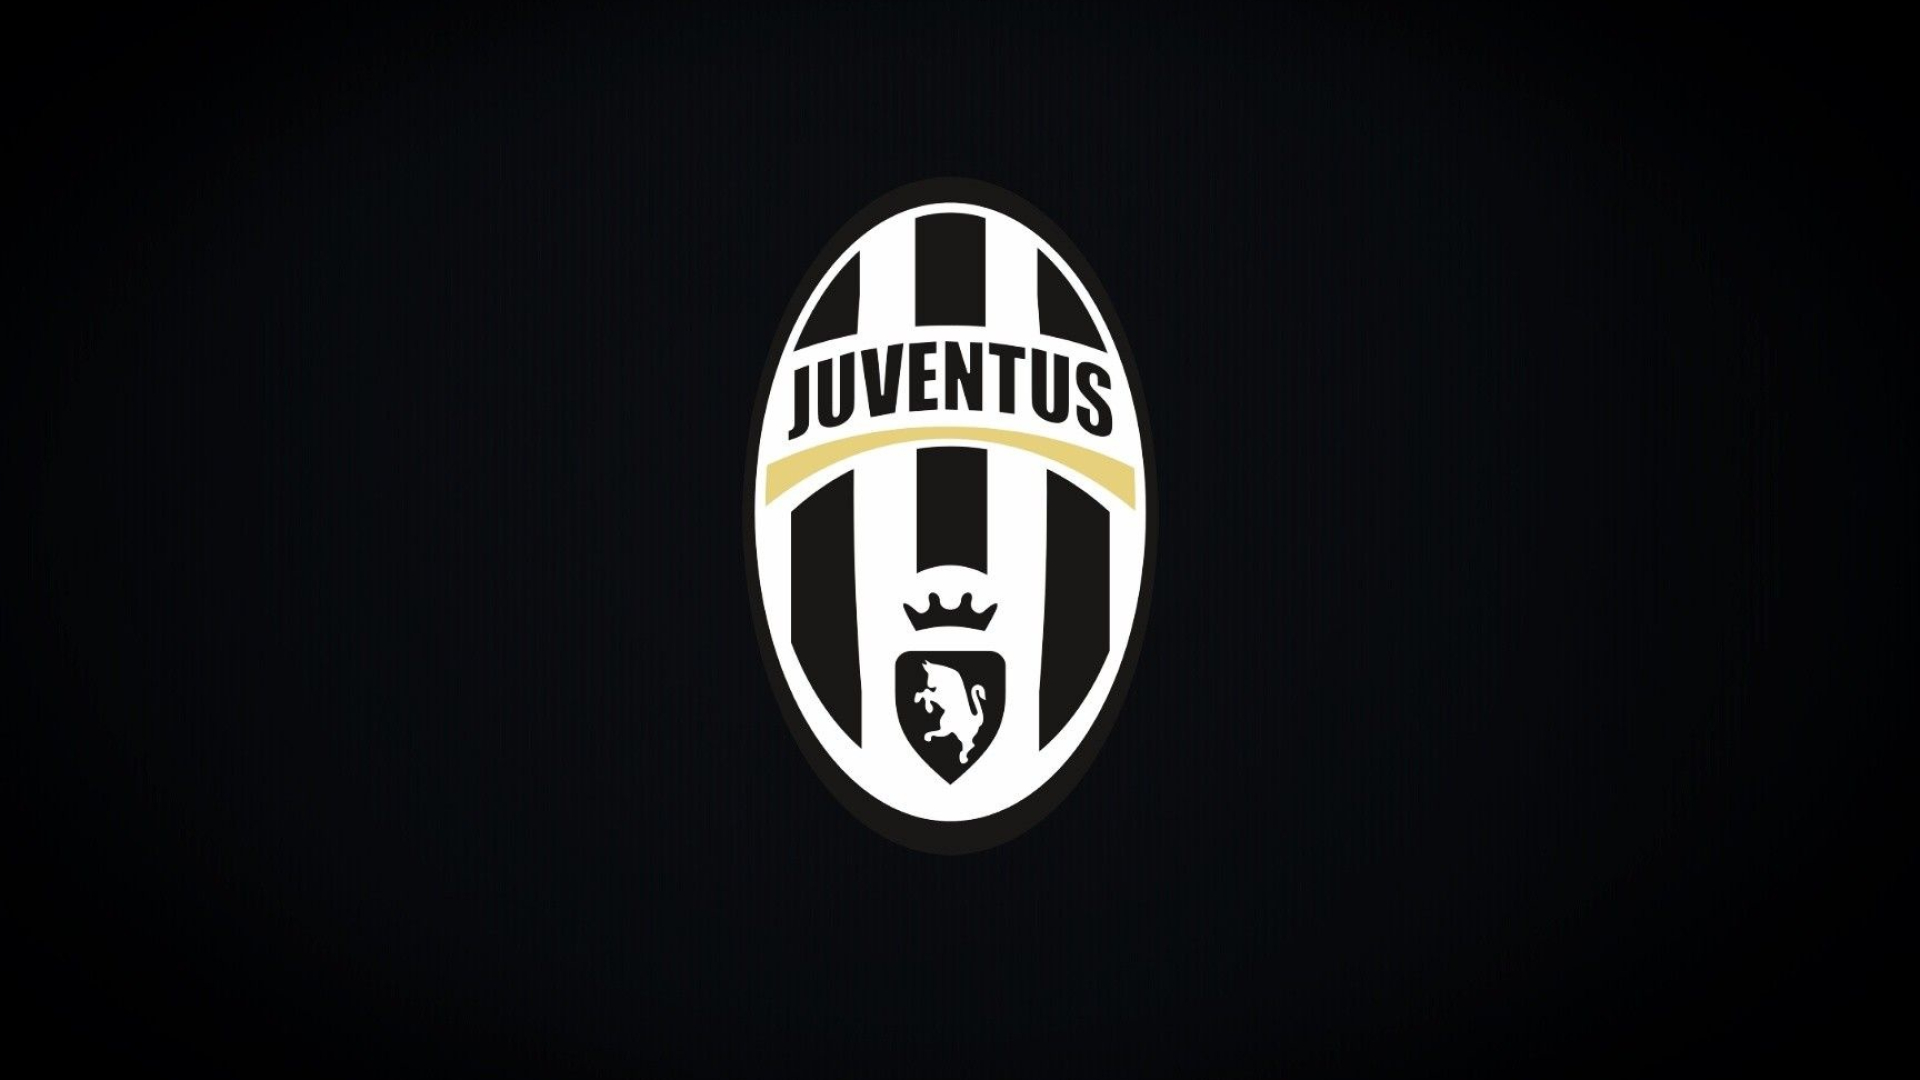 Juventus: Placed seventh in the FIFA's historic ranking of the best clubs, December 2000. 1920x1080 Full HD Wallpaper.